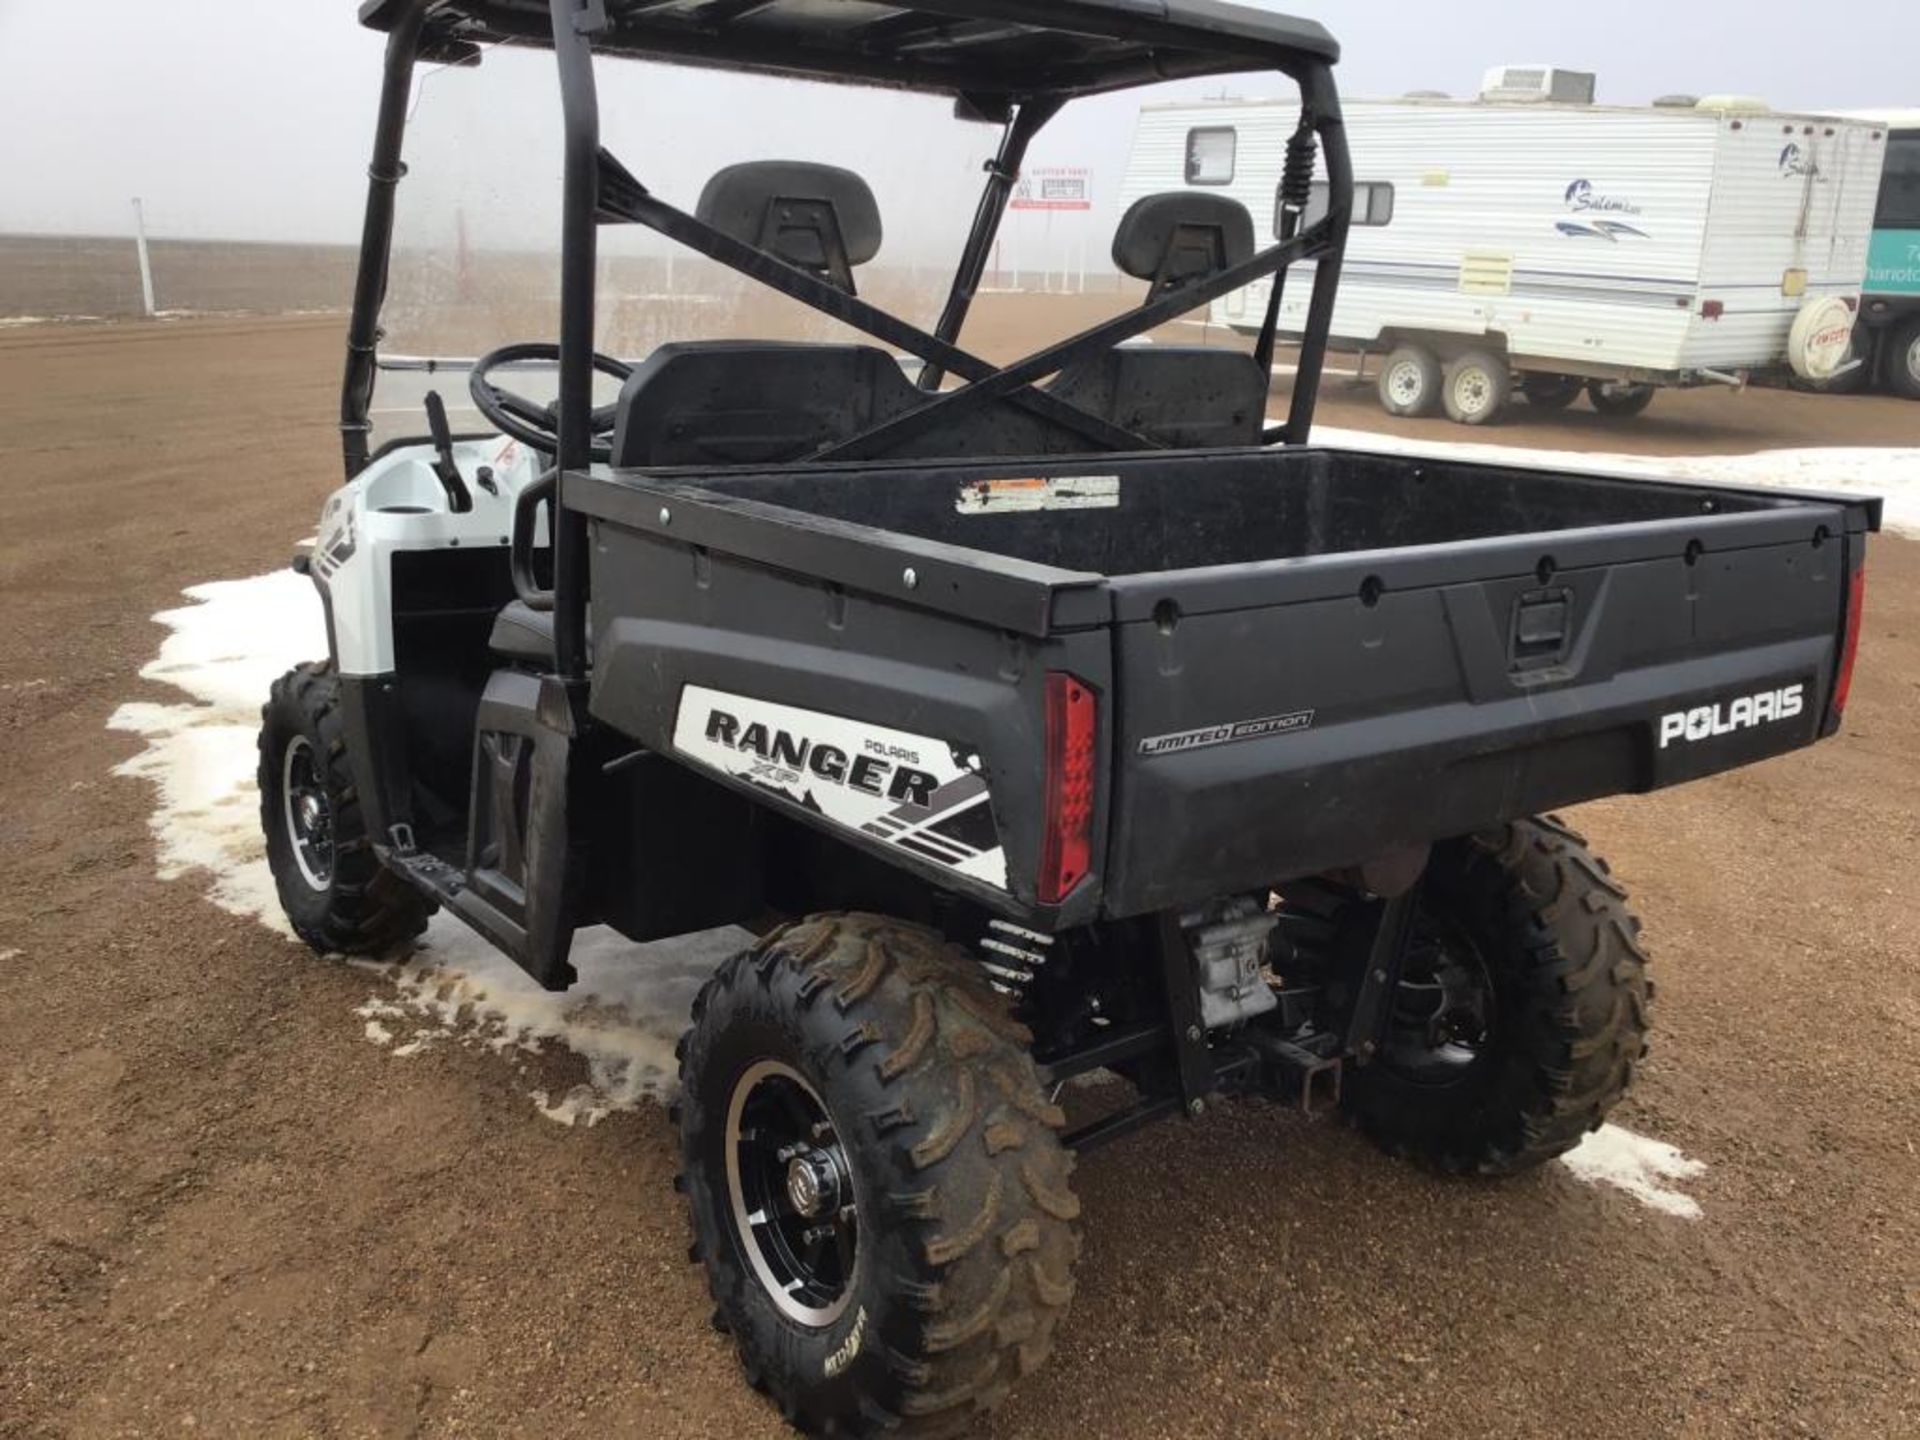 2012 Polaris 800 Ranger Side-by-side Utility Vehie - Image 4 of 5